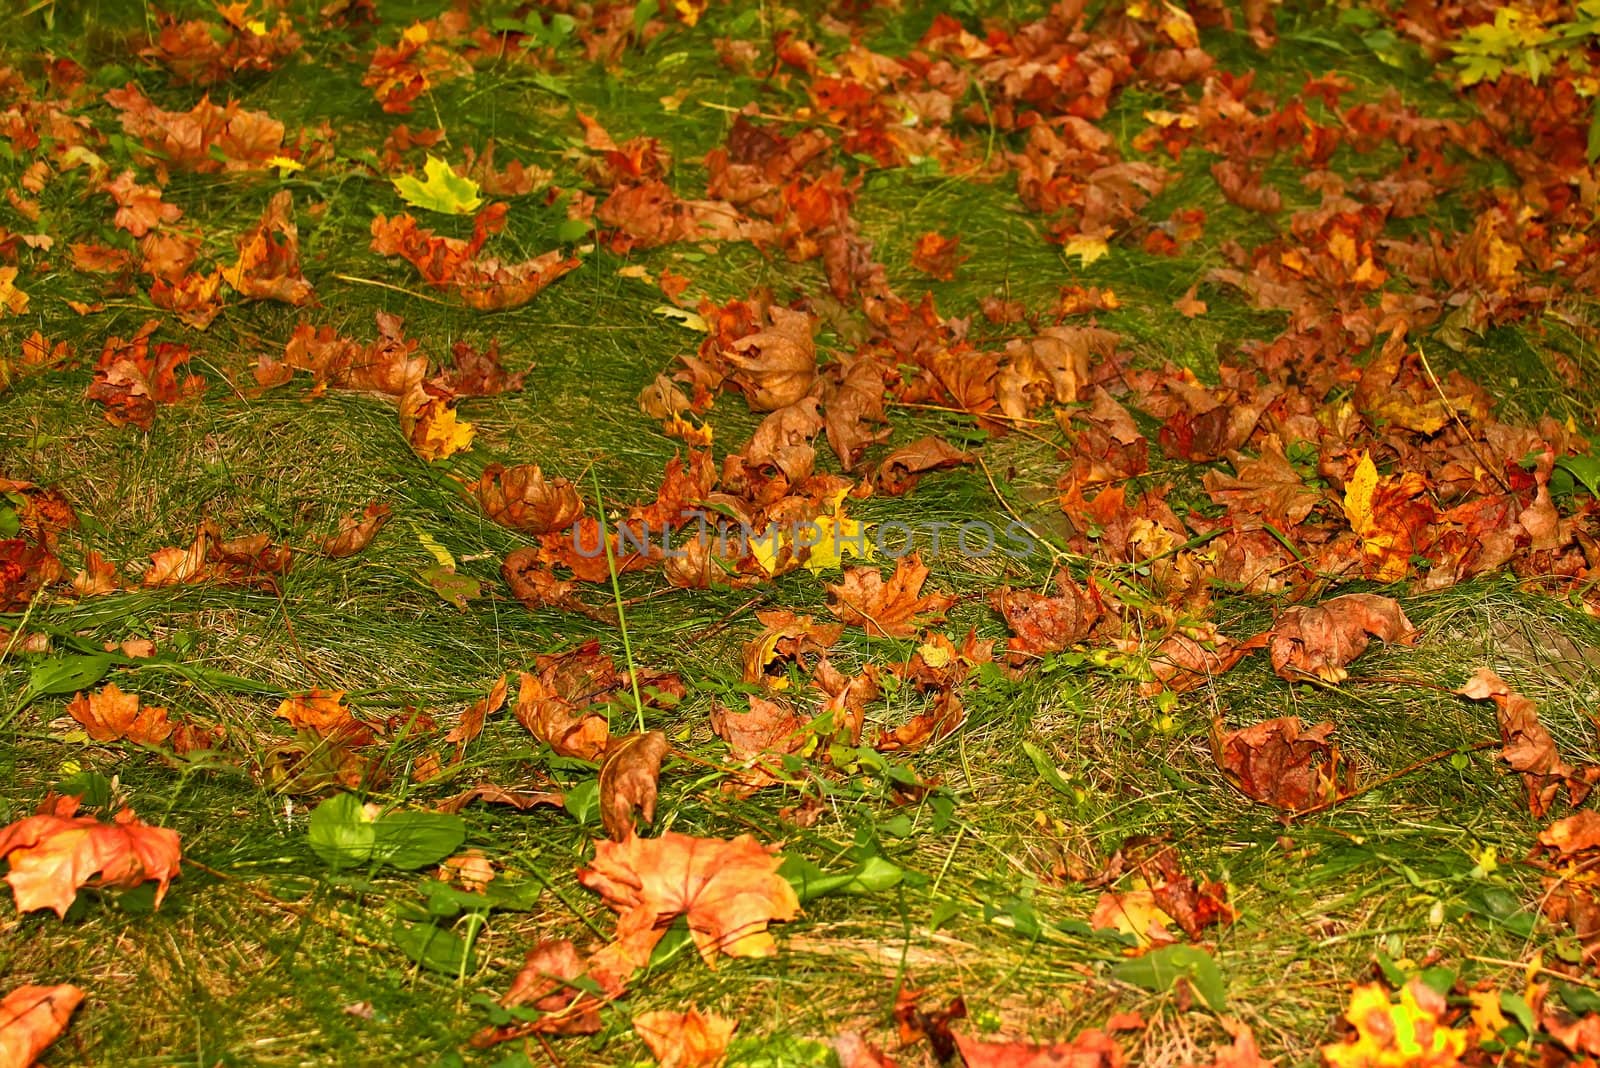 Autumn in the forest. Colorful fallen maple leaves on green grass